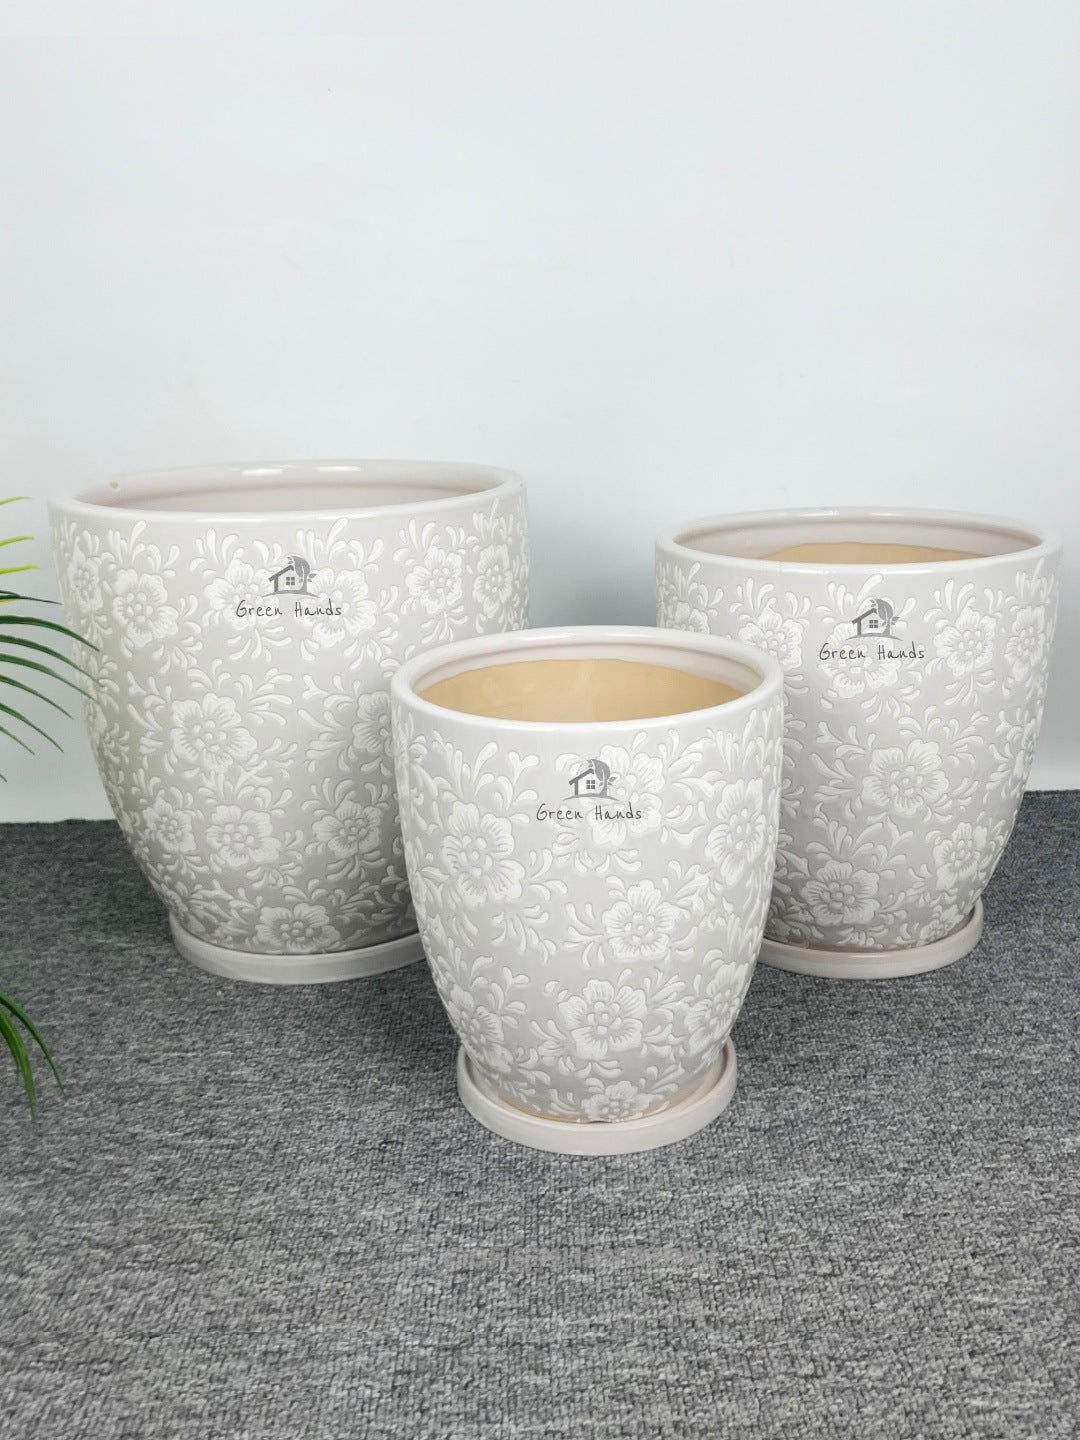 Antique Floral White Snow Ceramic Pots in Dubai & Abu Dhabi: Perfect for Minimalist Interiors, Nature, and Art Lovers with Drain Hole and Matching Base Plates